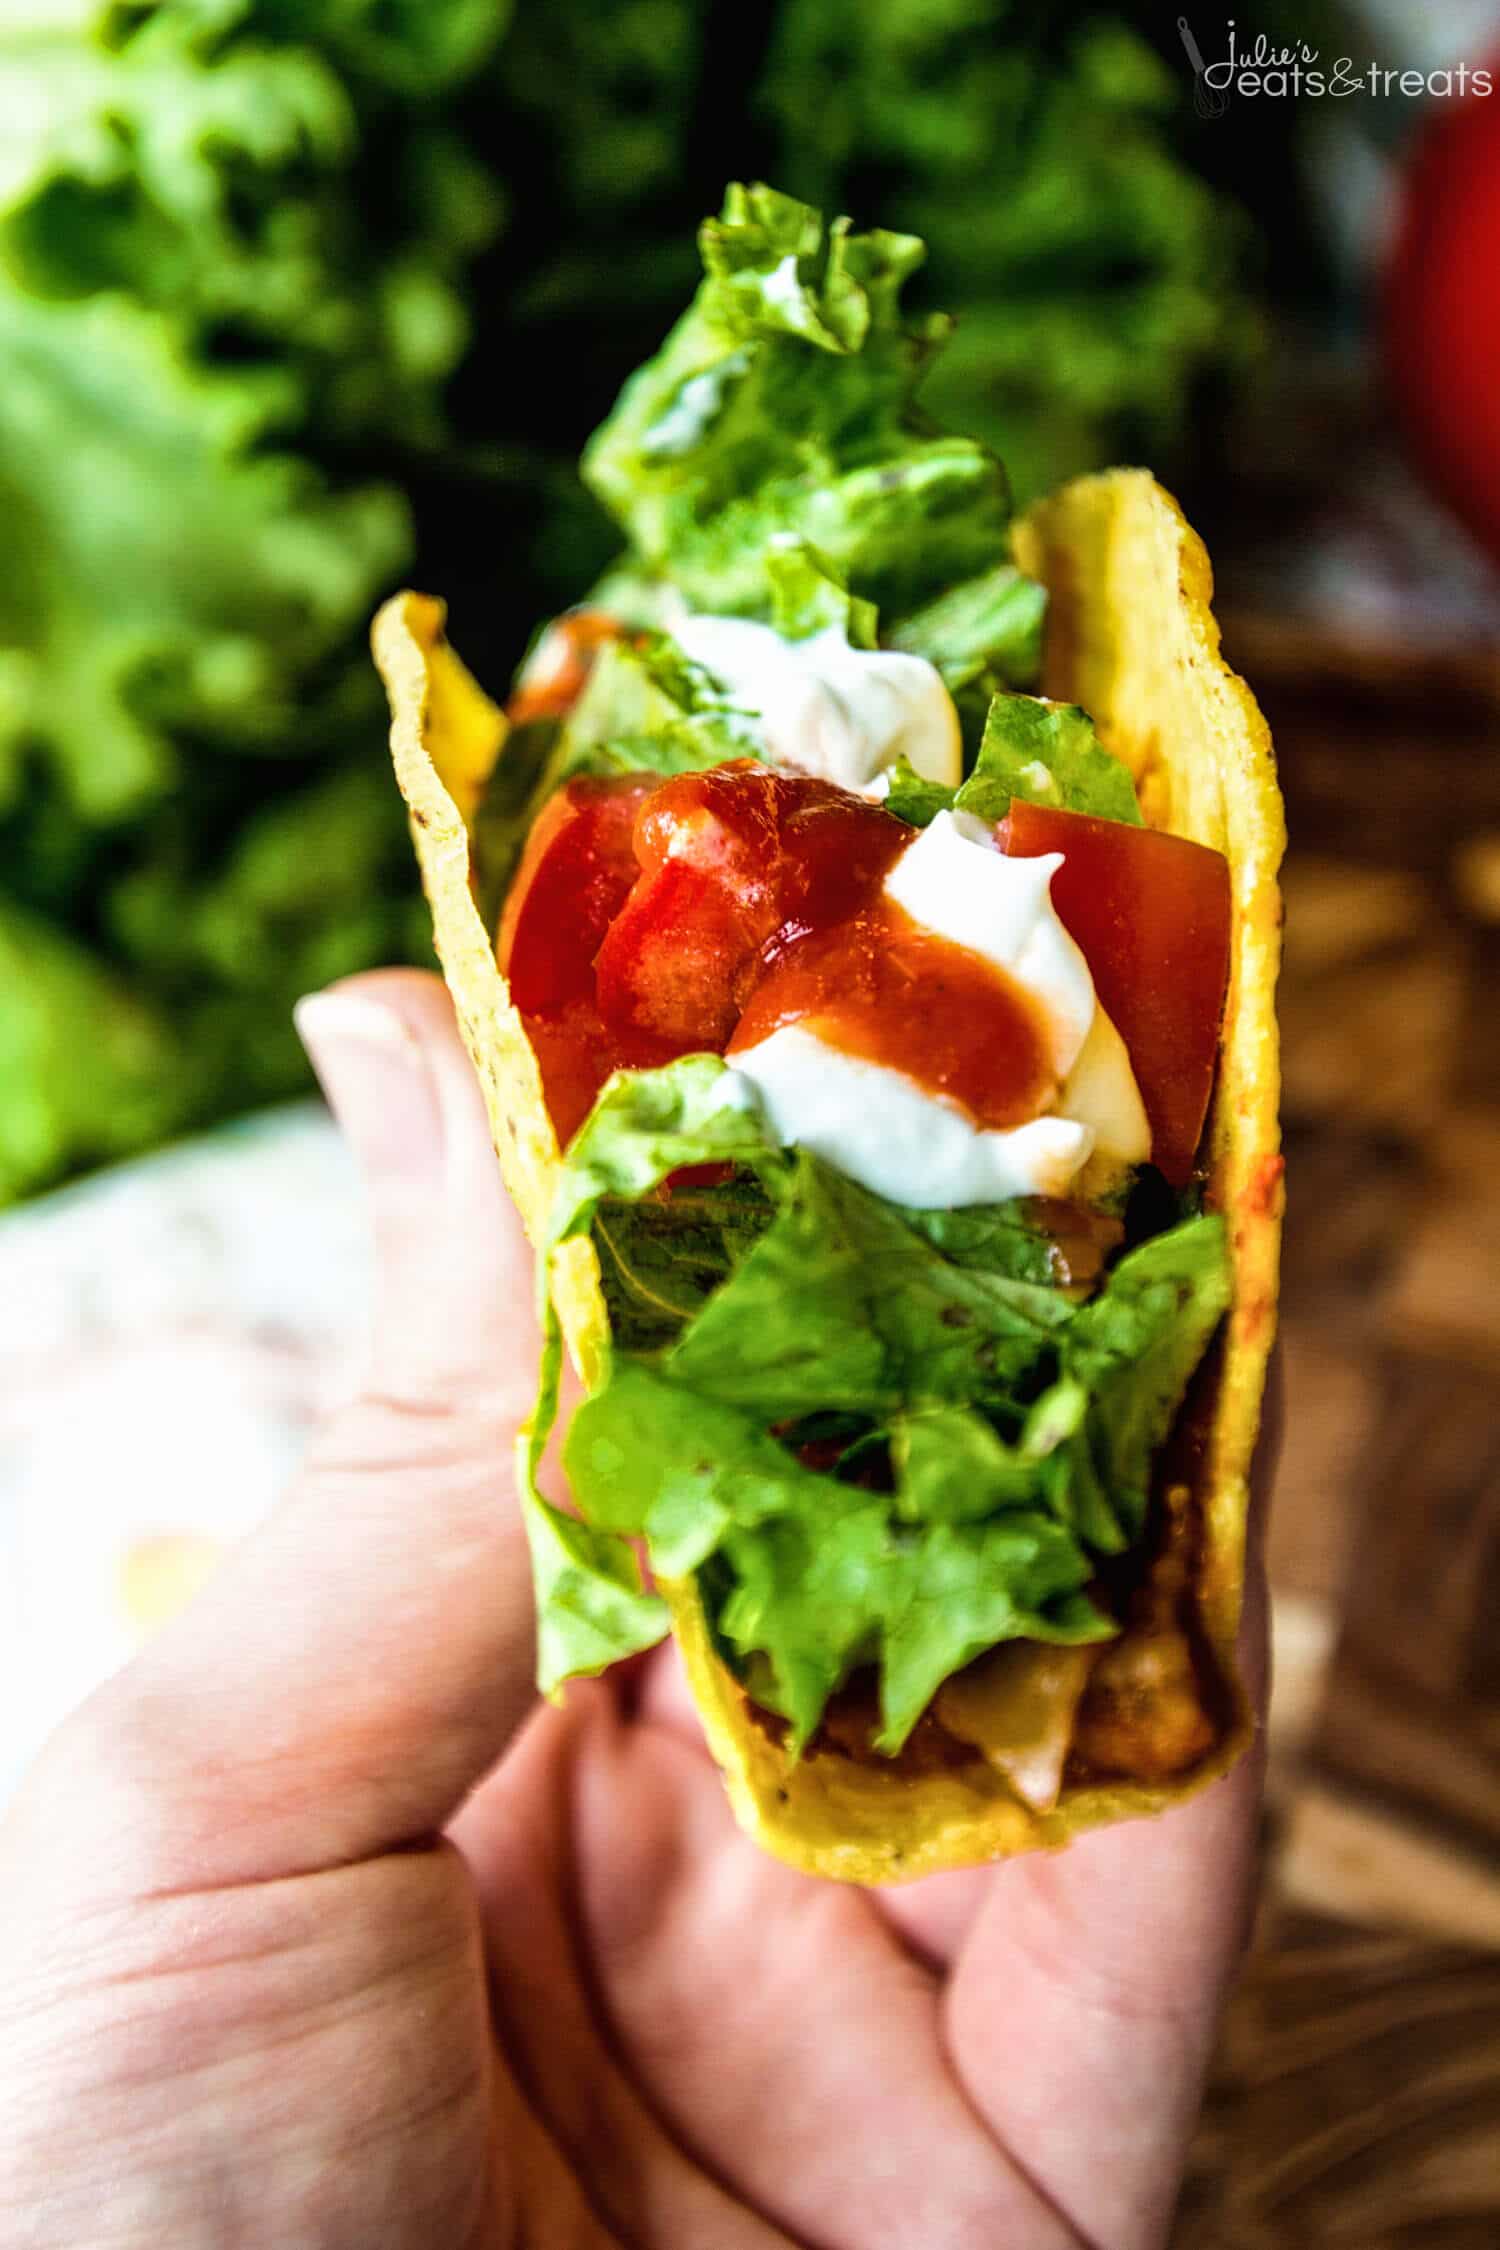 Easy Baked Tacos Recipe ~ Super Easy and Delicious Tacos That Are Baked in the Oven for a Quick Weeknight Meal! Perfect No Stress Meal the Whole Family Will Love!